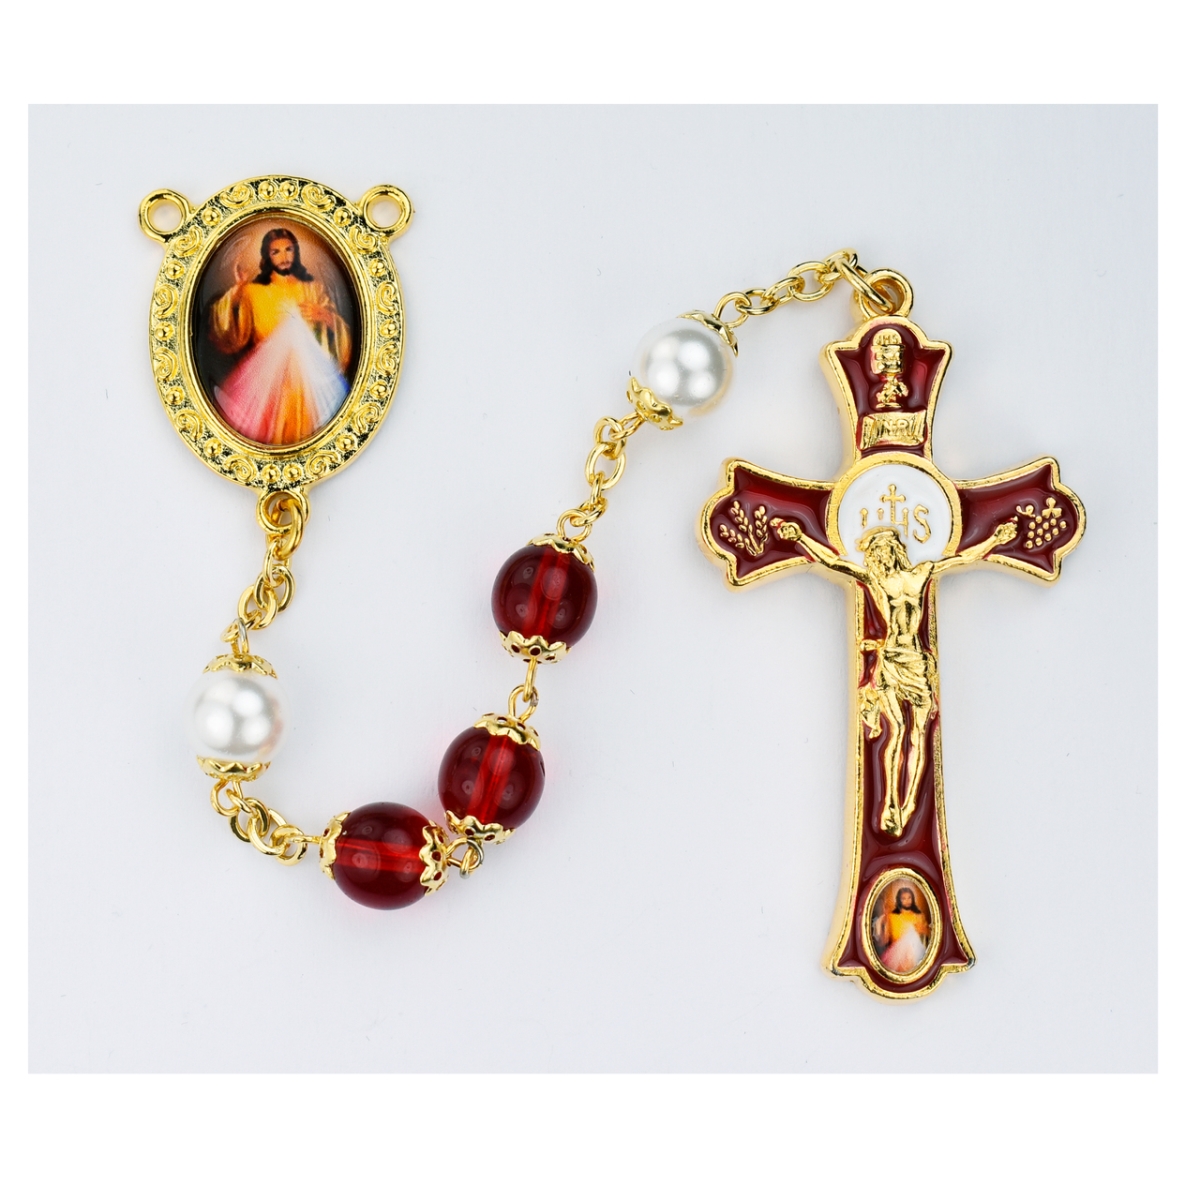 Picture of McVan R780HF 8 mm Divine Mercy Decal Mass Cross Rosary Set - Red